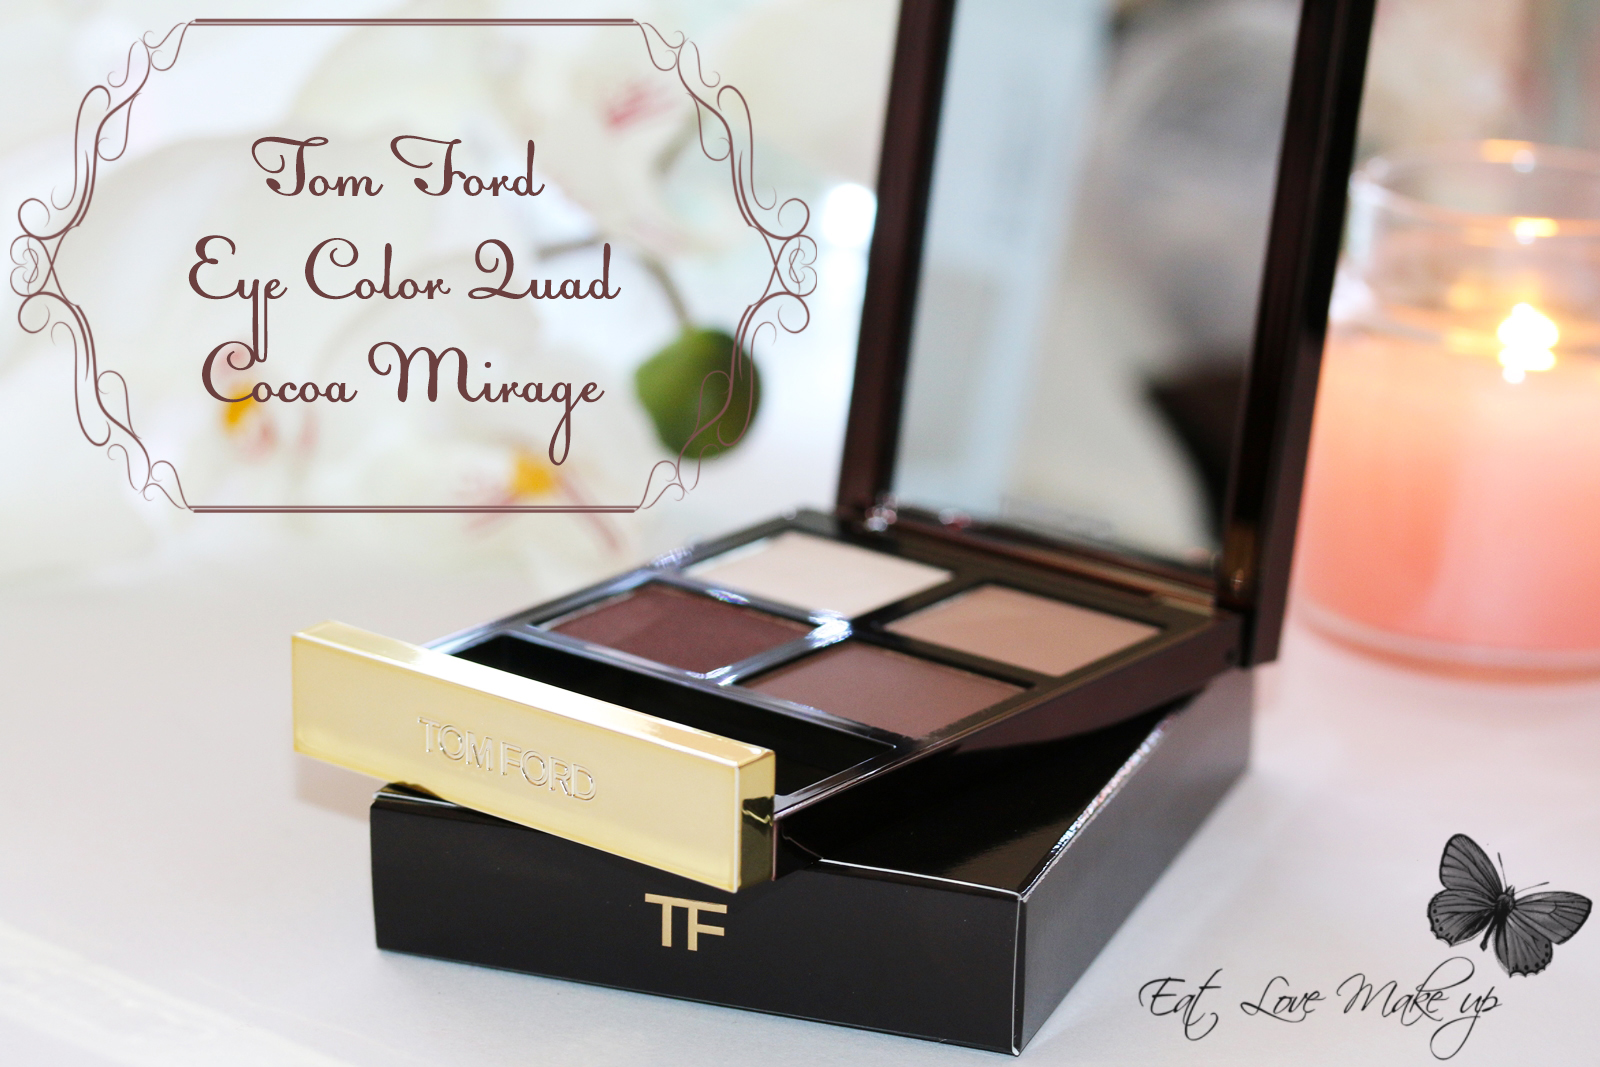 Tom Ford Eye Color Quad 03 Cocoa Mirage